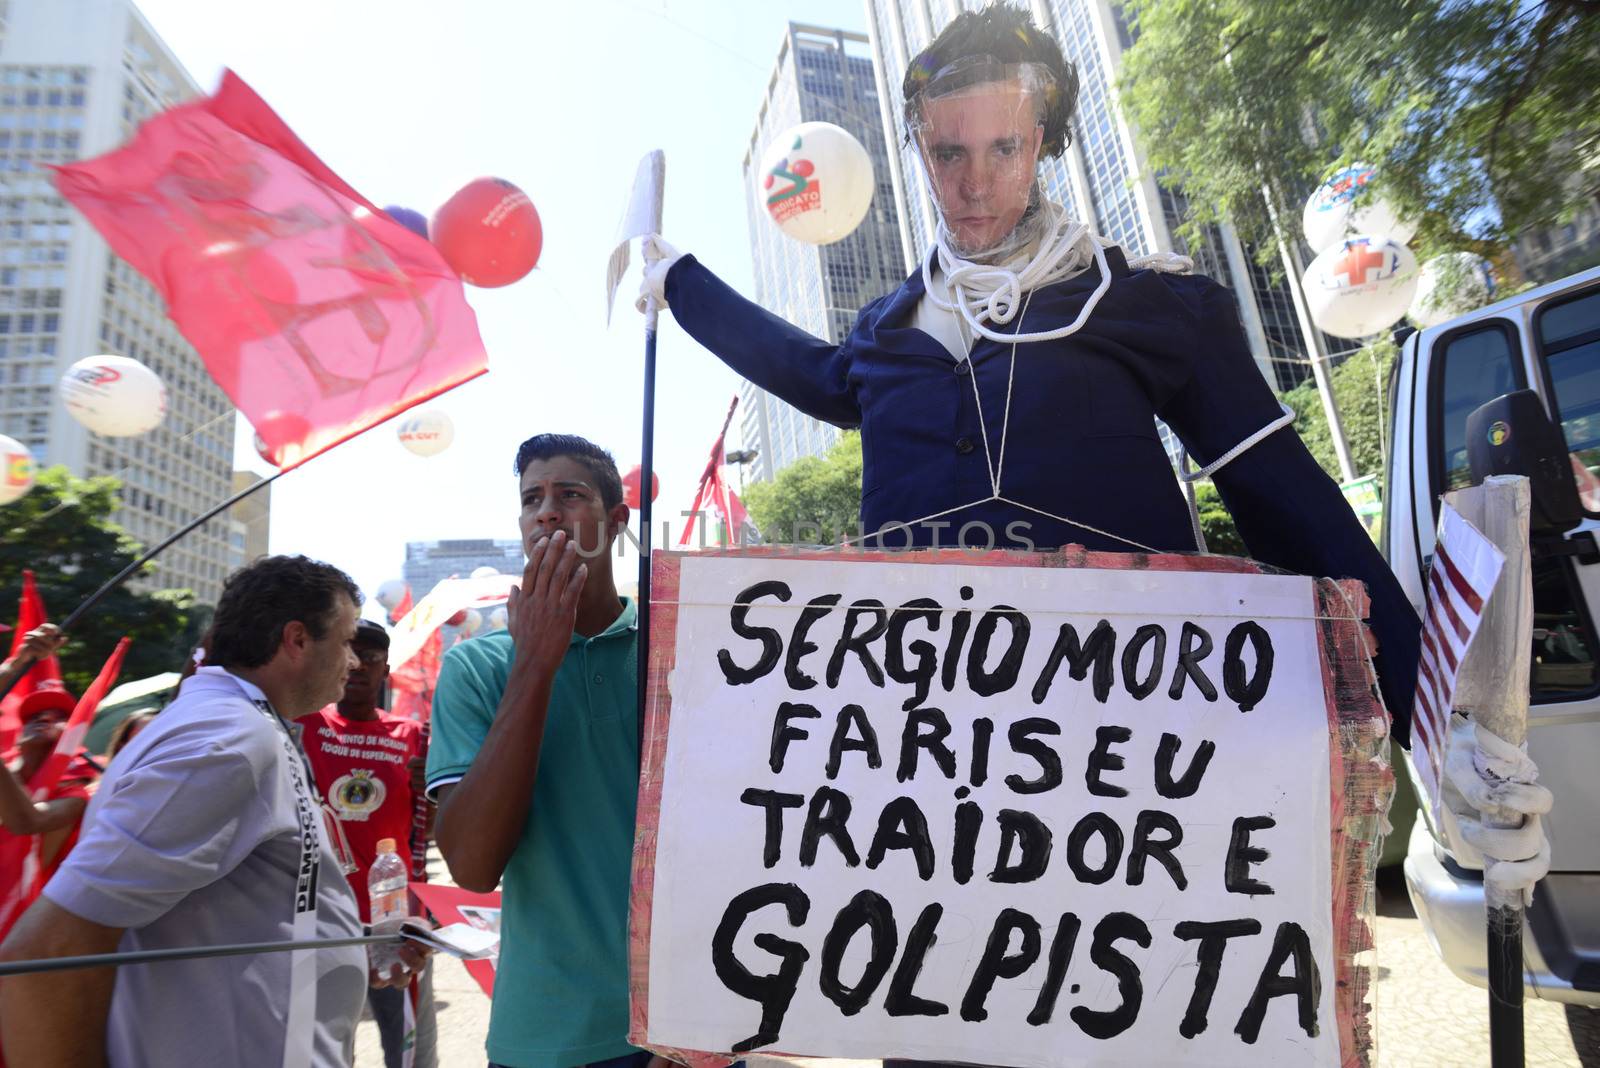 BRAZIL, Sao Paulo: An effigy of judge Sergio Moro depicting him as a traitor is seen as supporters of Brazilian President Dilma Rousseff follow on big screens in Sao Paulo, the voting of lawmakers at the Congress in Brasilia on whether the impeachment of Rousseff will move forward, on April 17, 2016. The voting followed a raucous debate that transfixed the deeply divided nation. The opposition needs a total of 342 out of the 513 deputies in the lower house of Congress to authorize the trial. Rousseff, whose approval rating has plunged to a dismal 10 percent, faces charges of embellishing public accounts to mask the budget deficit during her 2014 reelection.